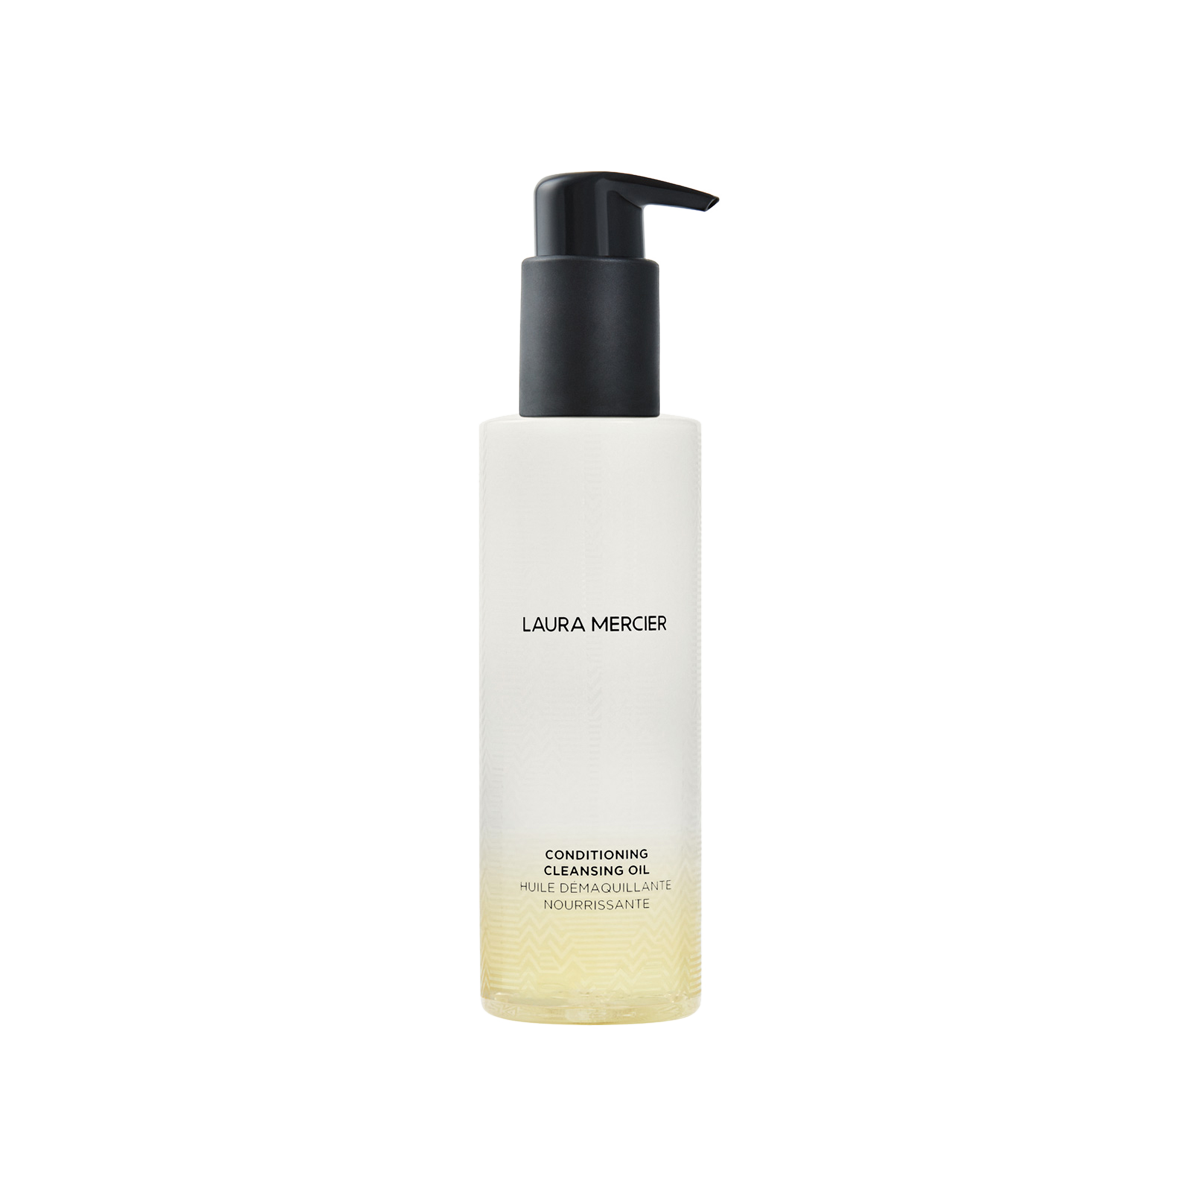 Laura Mercier - Conditioning Cleansing Oil